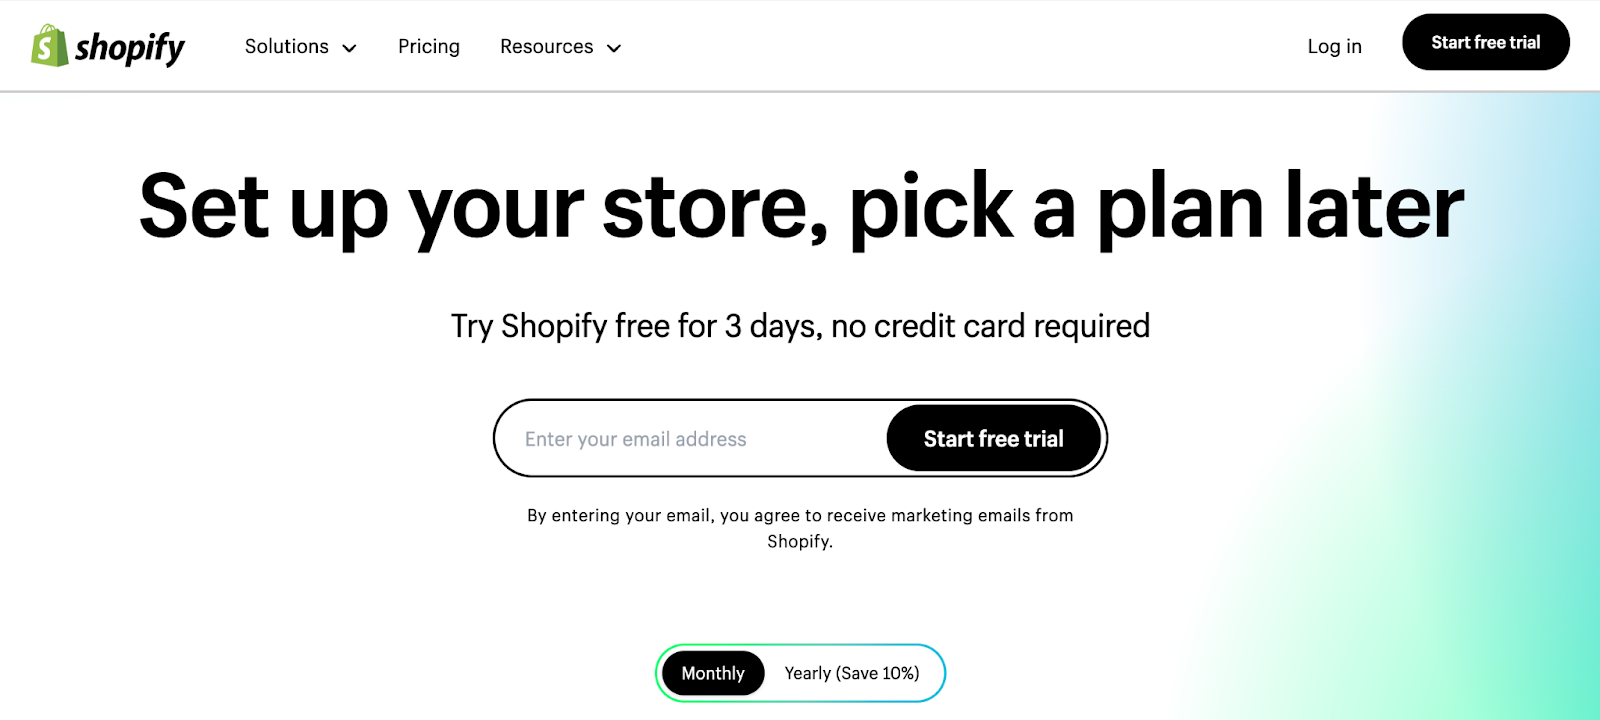 10 Easy Steps to Build a Shopify Website